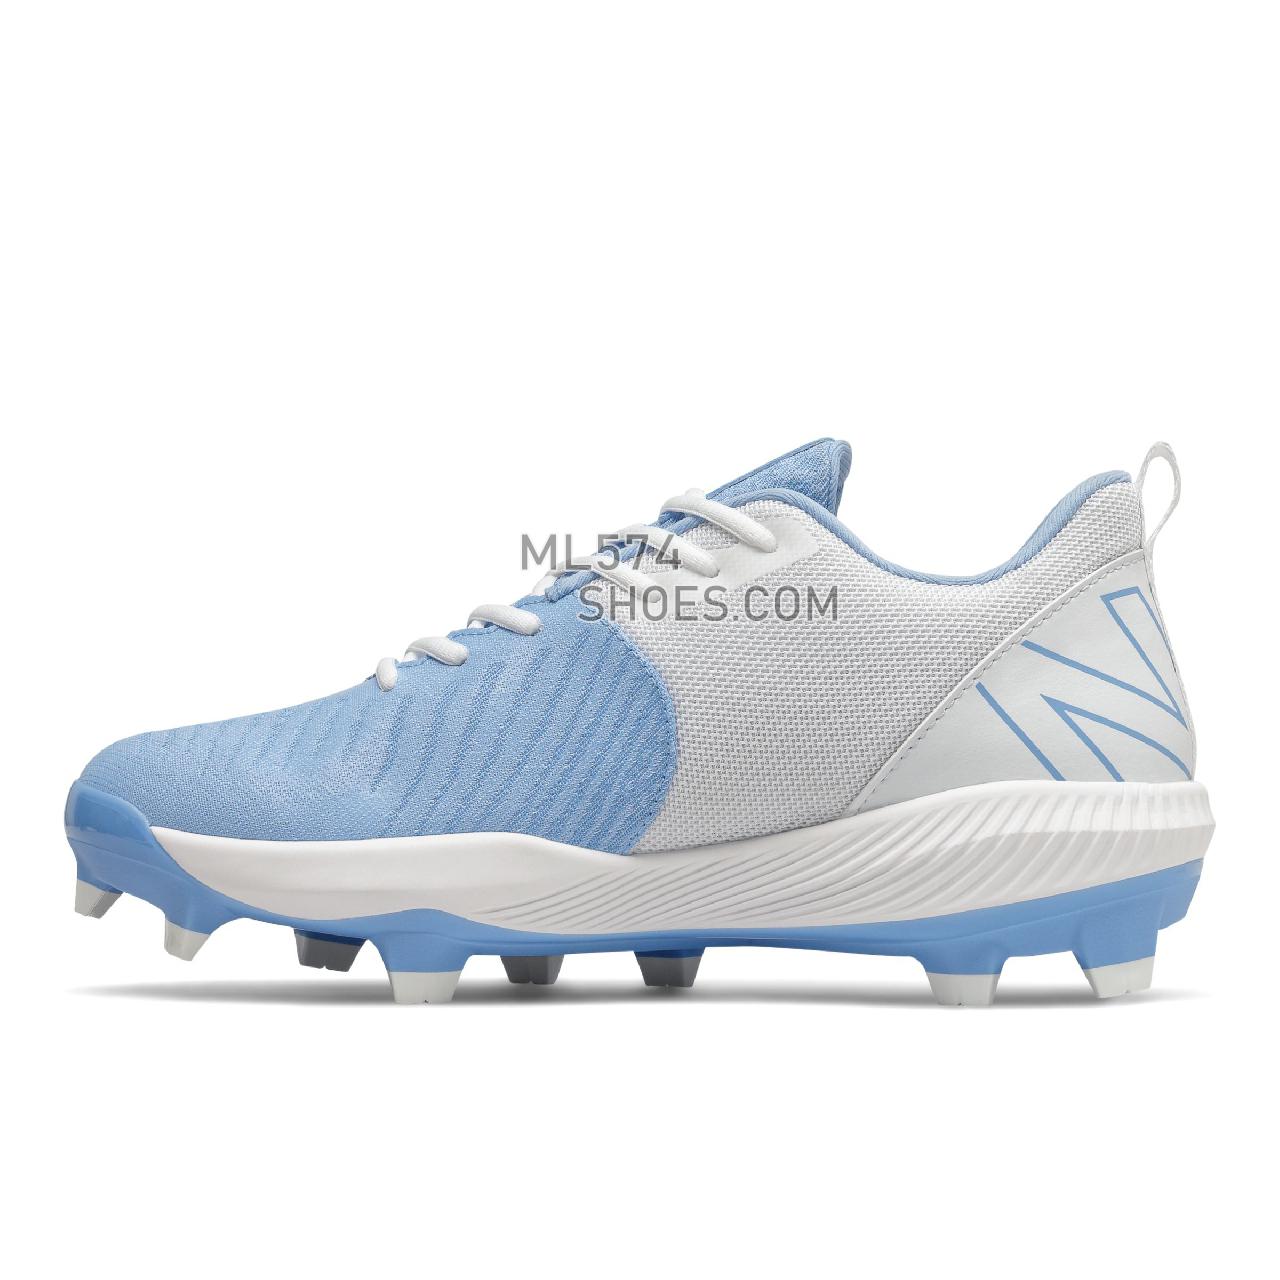 New Balance FuelCell 4040 v6 Molded - Men's Mid-Cut Baseball Cleats - Team Carolina with White - PL4040S6